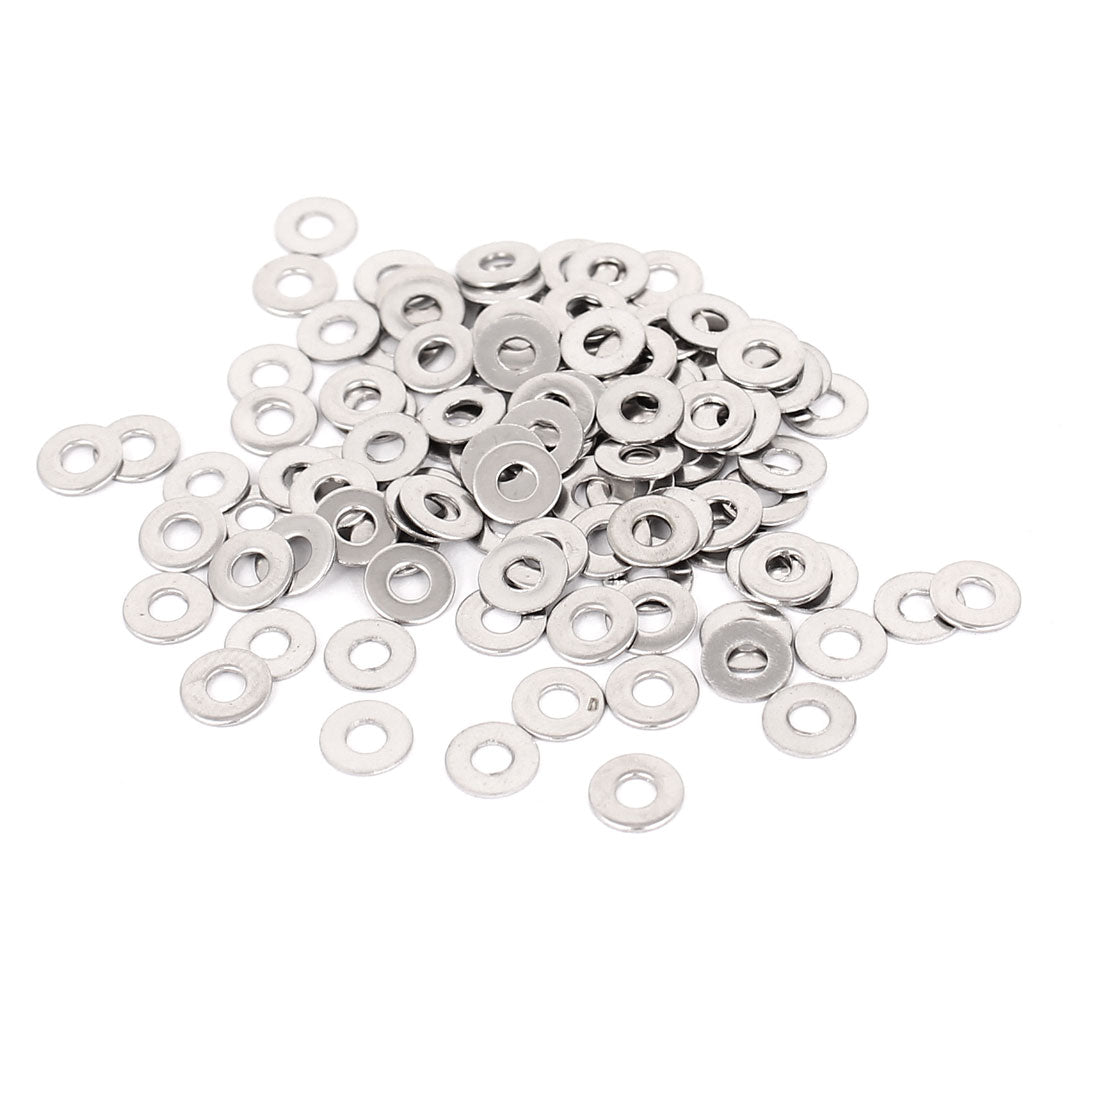 uxcell Uxcell 100Pcs M2.5x6mmx0.5mm Stainless Steel Metric Round Flat Washer for Bolt Screw